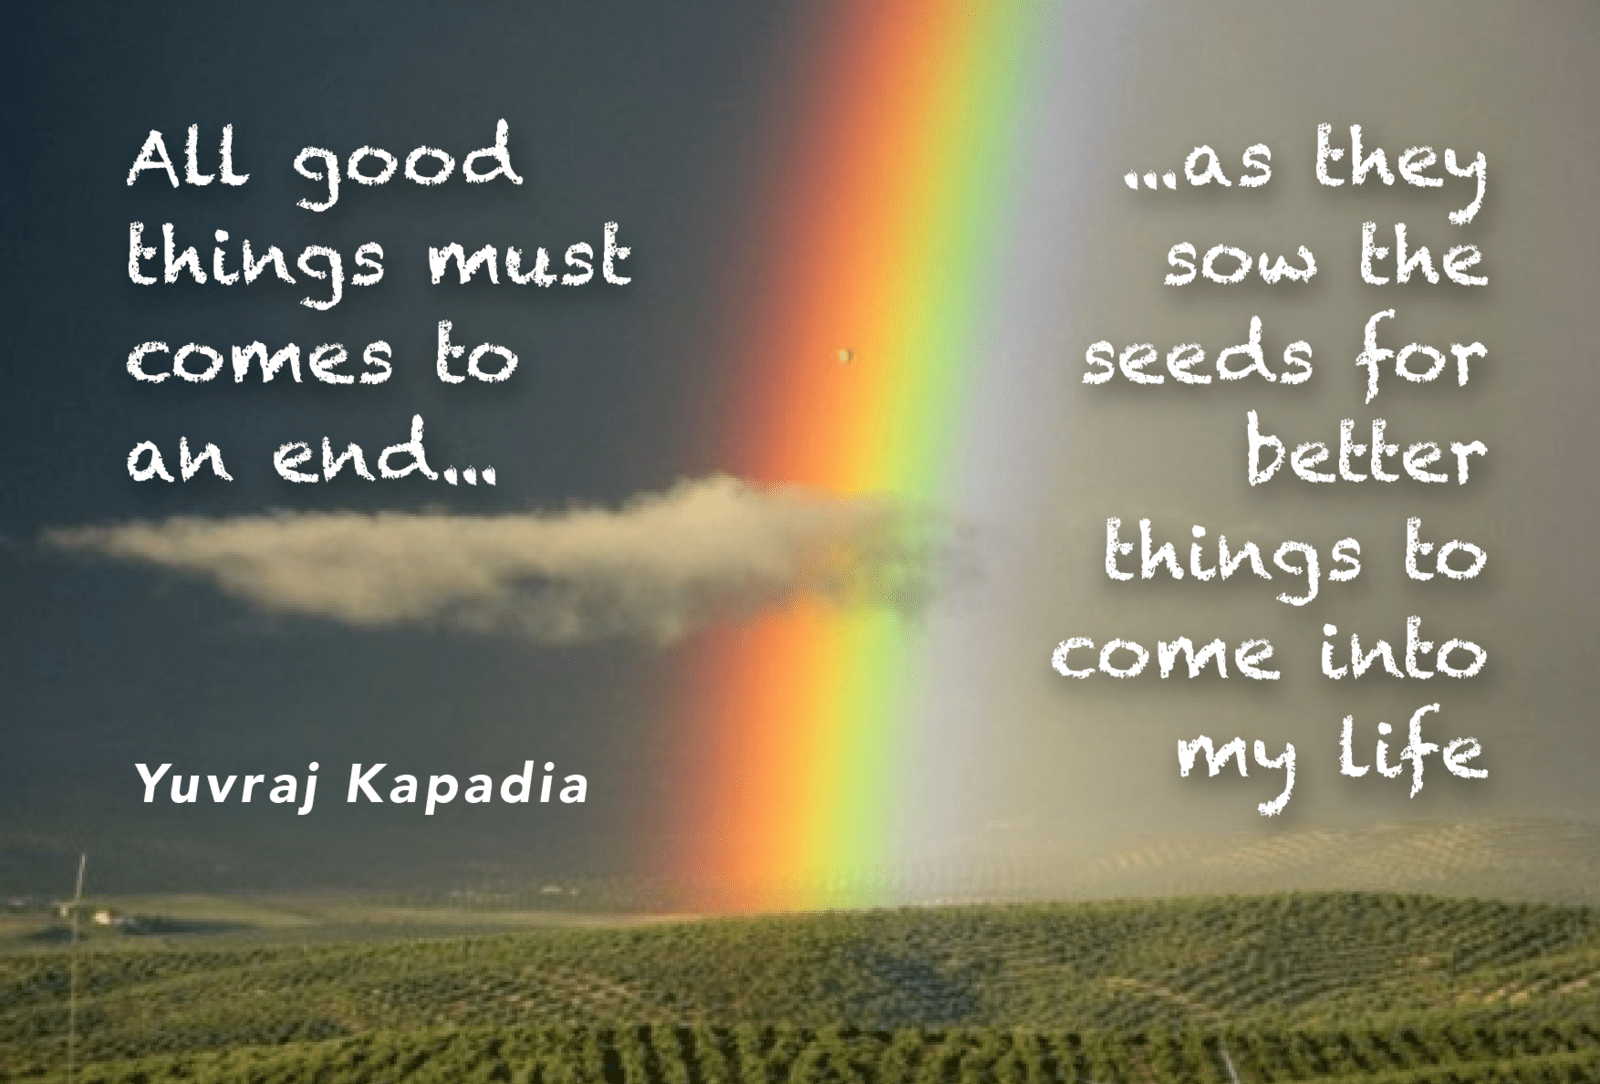 All good things must comes to an end ... as they sow the seeds for better things to come into my life. Yuvraj Kapadia